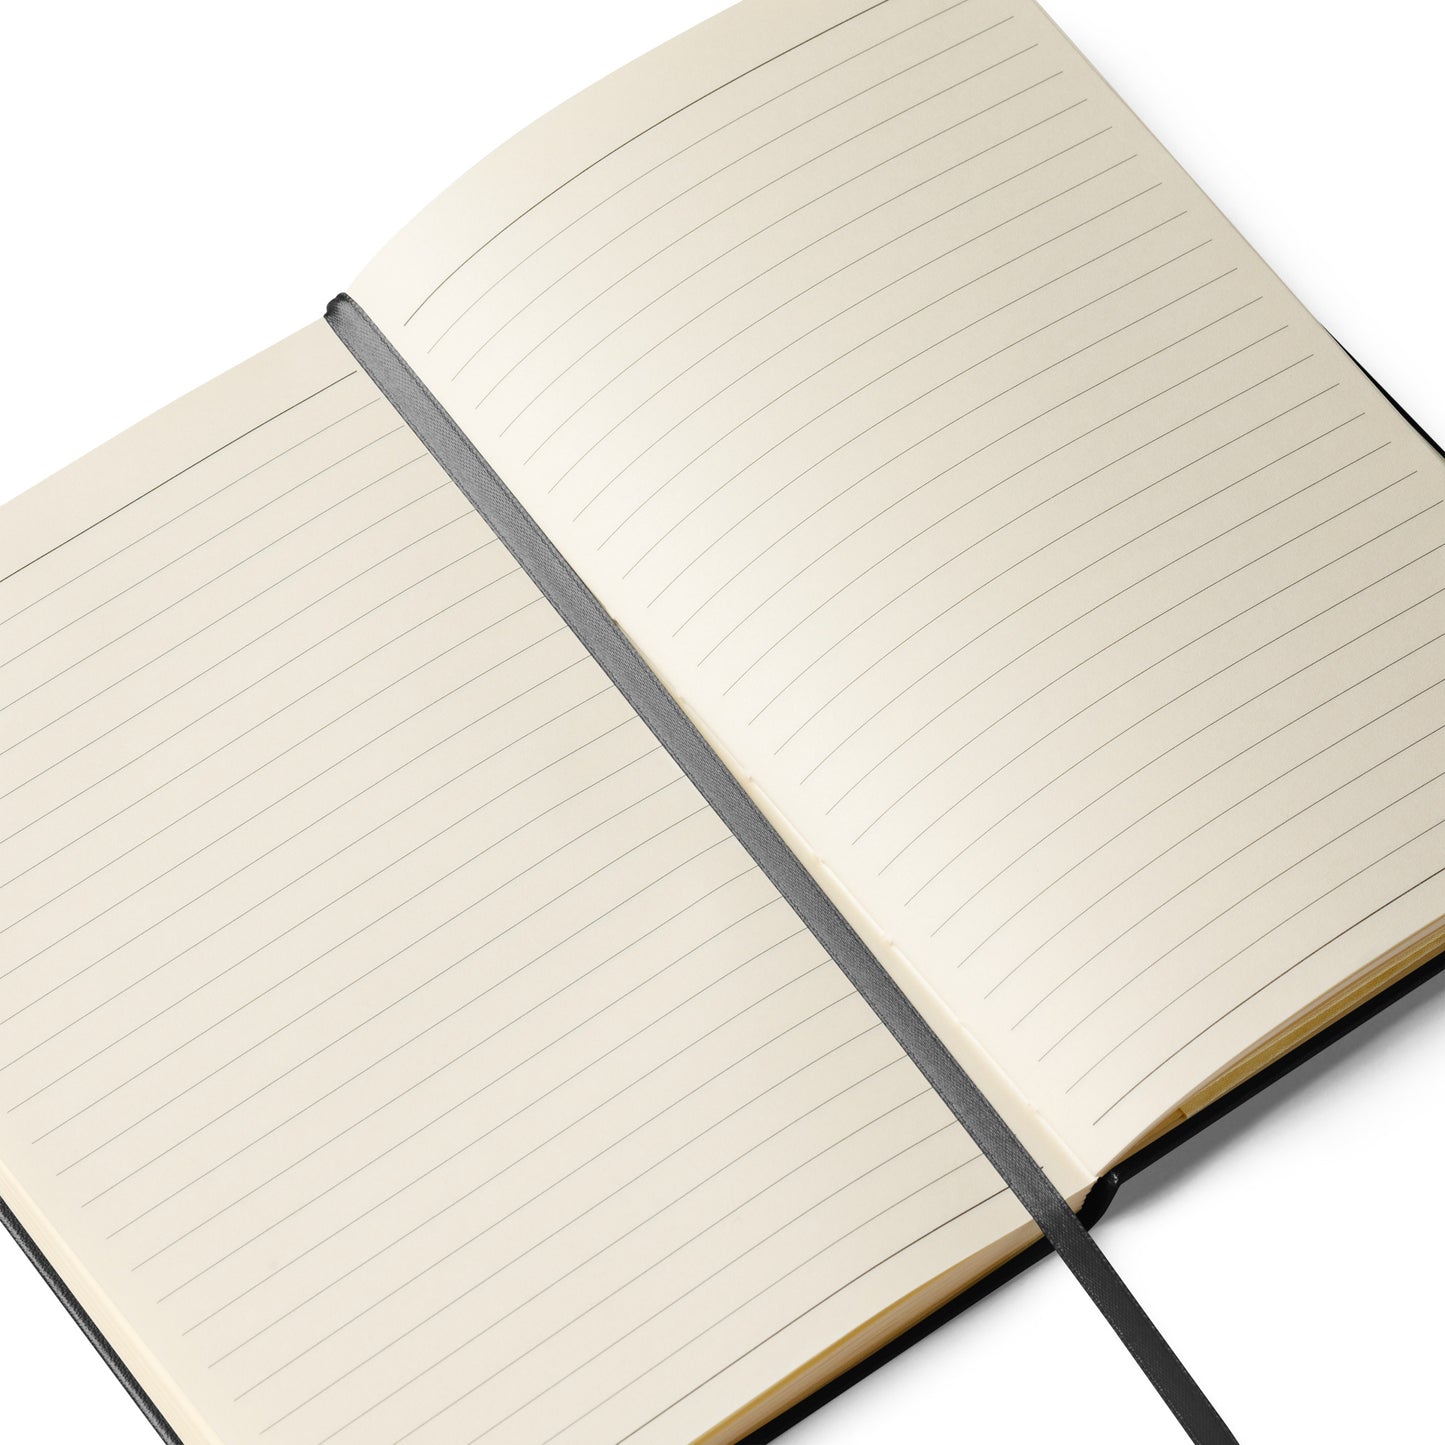 Sting Hardcover Notebook